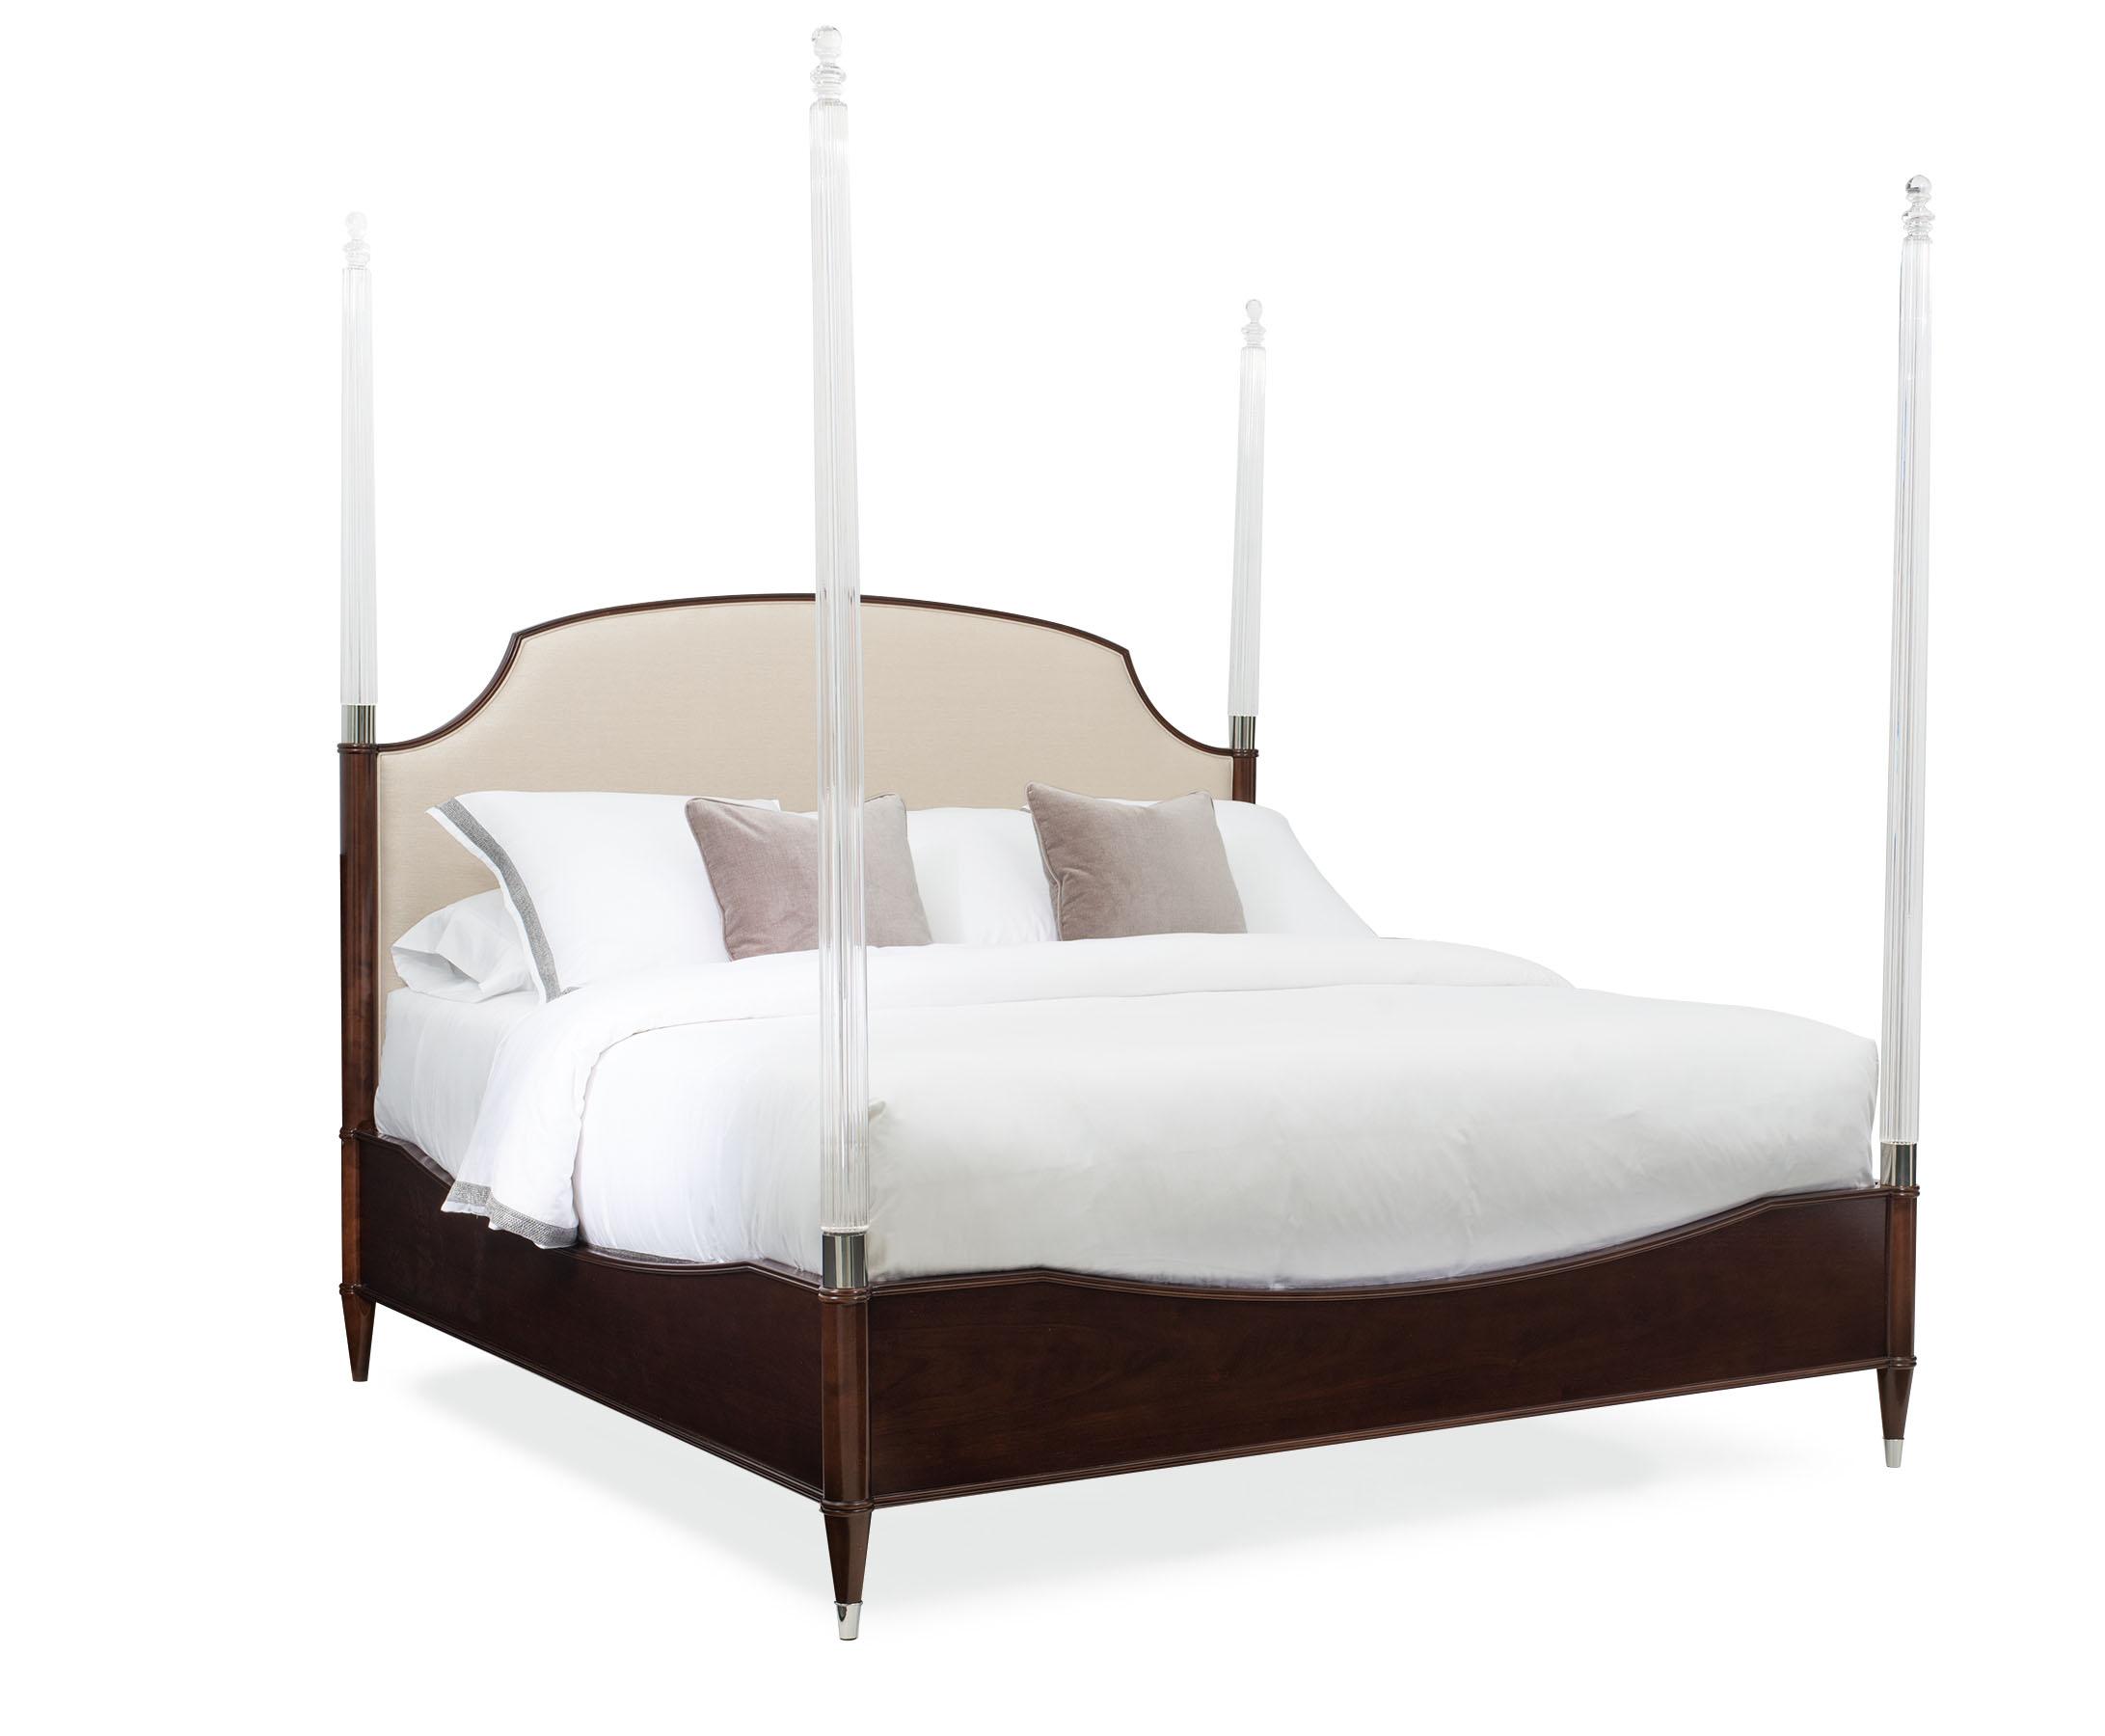 Contemporary Poster Bed Crown Jewel w/ Post CLA-420-127 in Mocha, Beige Fabric